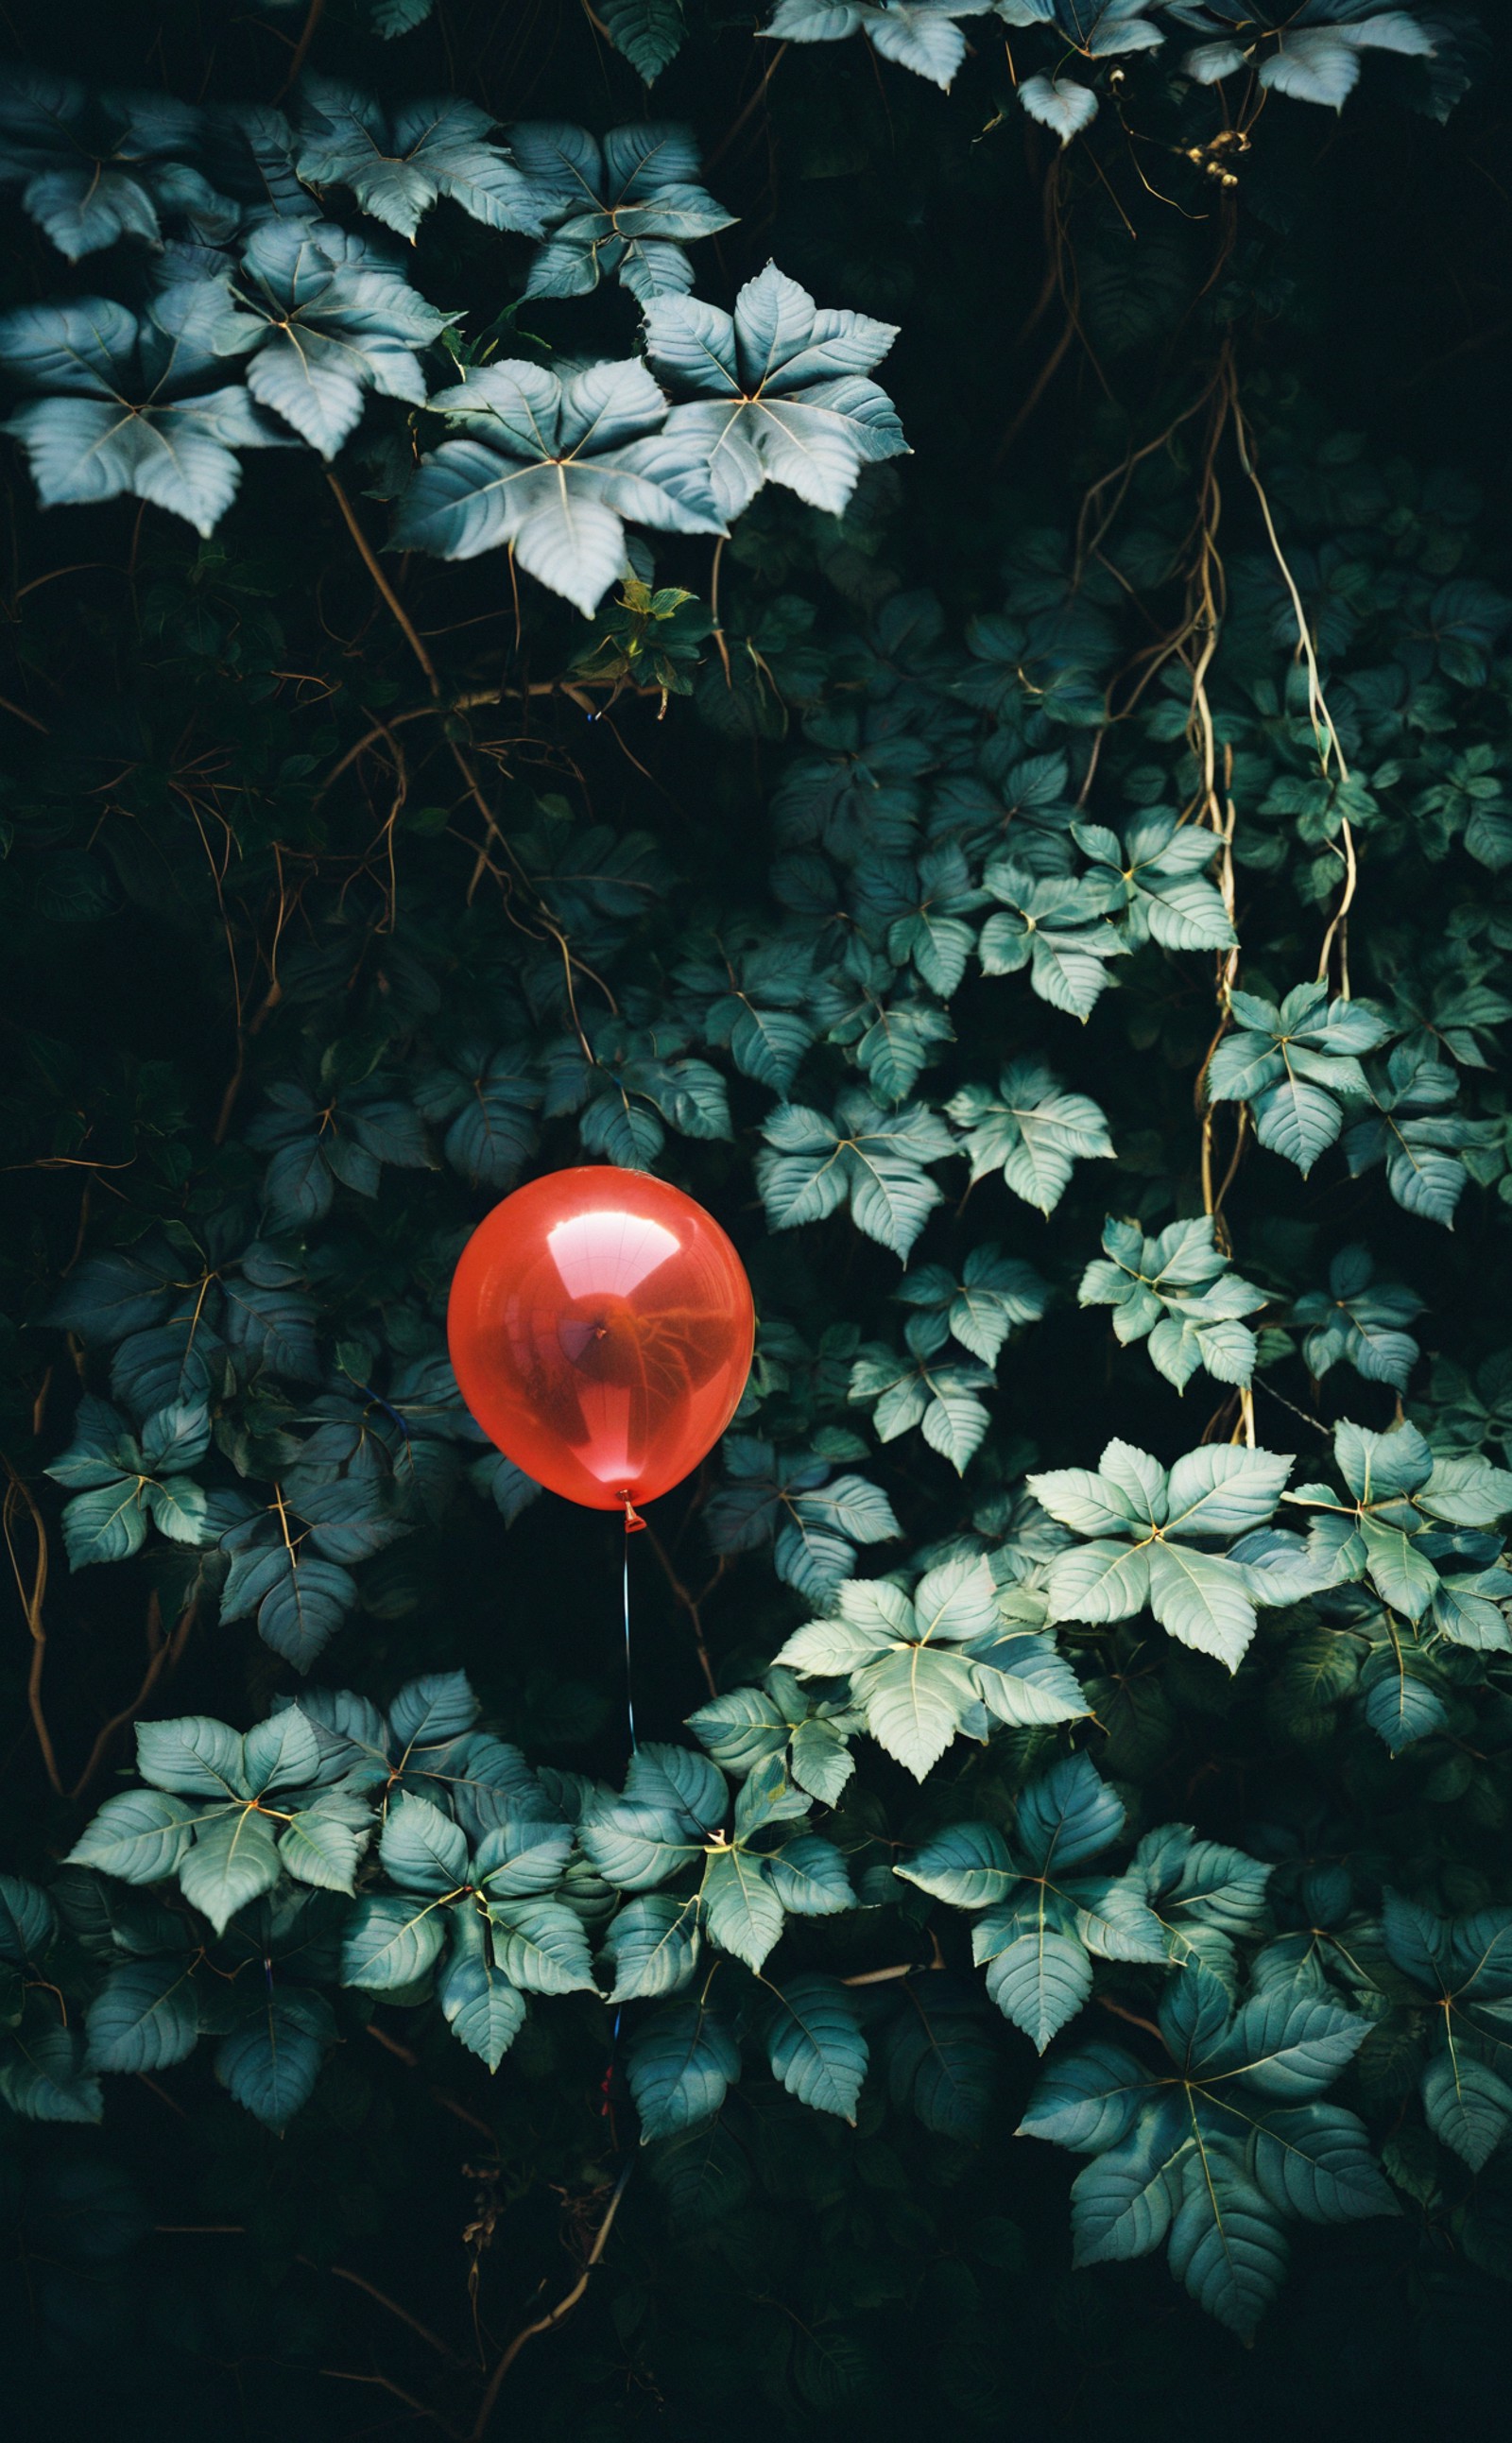 photography aesthetic,A solitary, vibrant red balloon floats among the green embrace of dense foliage, providing a stark, ...